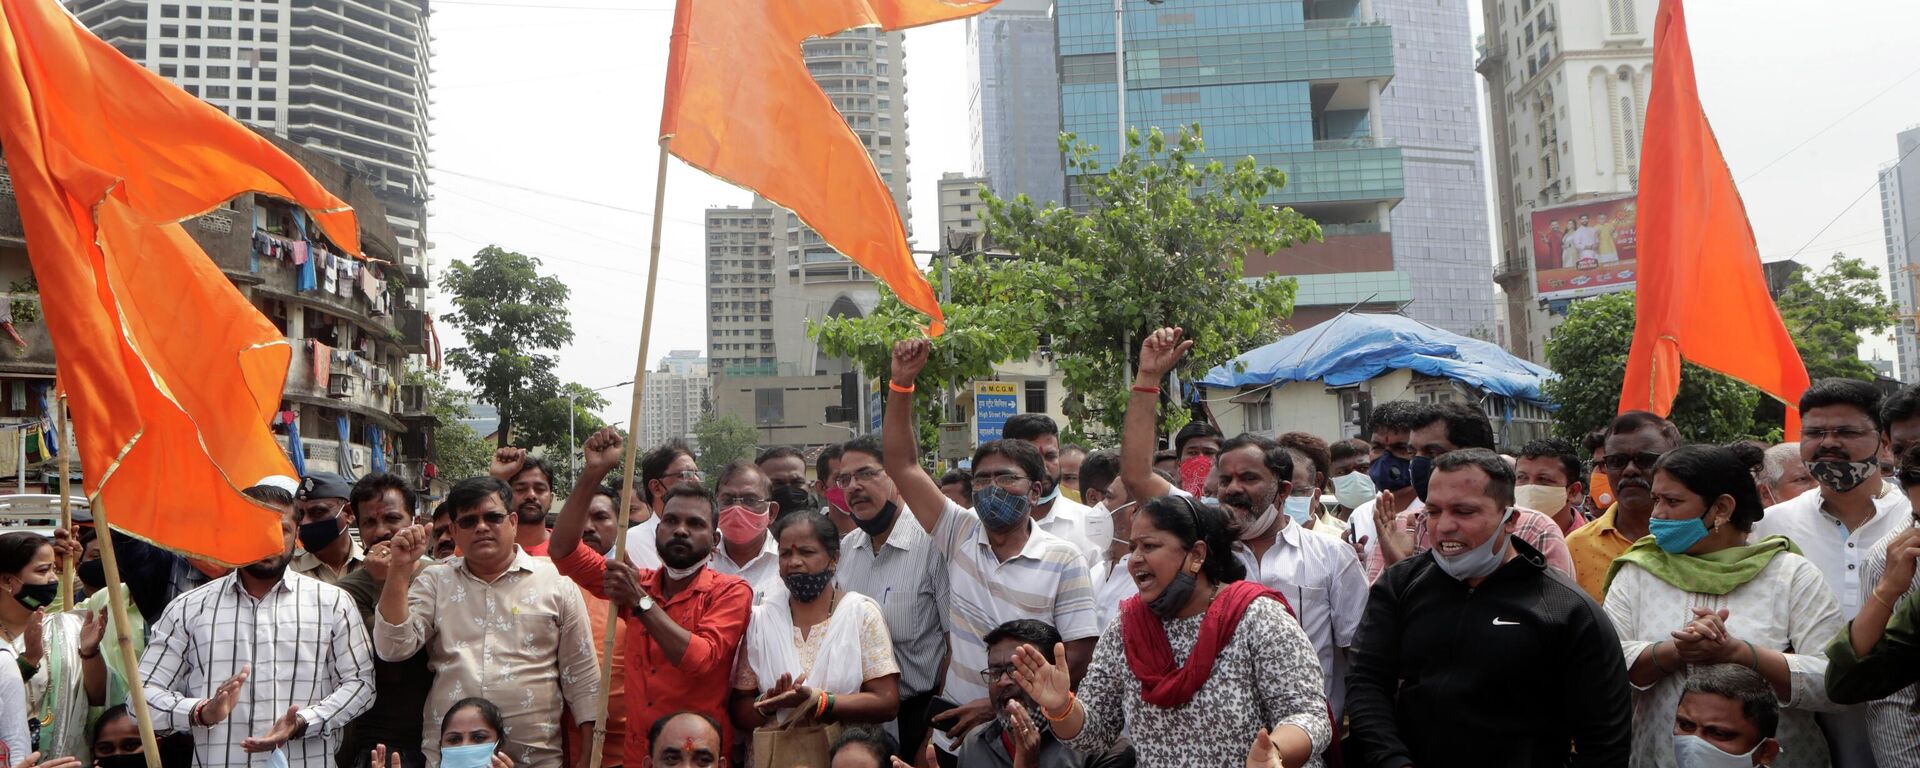 Shiv Sena party workers shout slogans during a state-wide strike in Maharashtra against last week’s violence in Uttar Pradesh state in Mumbai, India, Monday, Oct. 11, 2021. Four farmers died last week when a car owned a junior minister in Prime Minister Narendra Modi’s government ran over a group of protesting farmers in Lakhimpur Kheri, a town in Uttar Pradesh state. - Sputnik International, 1920, 17.04.2022